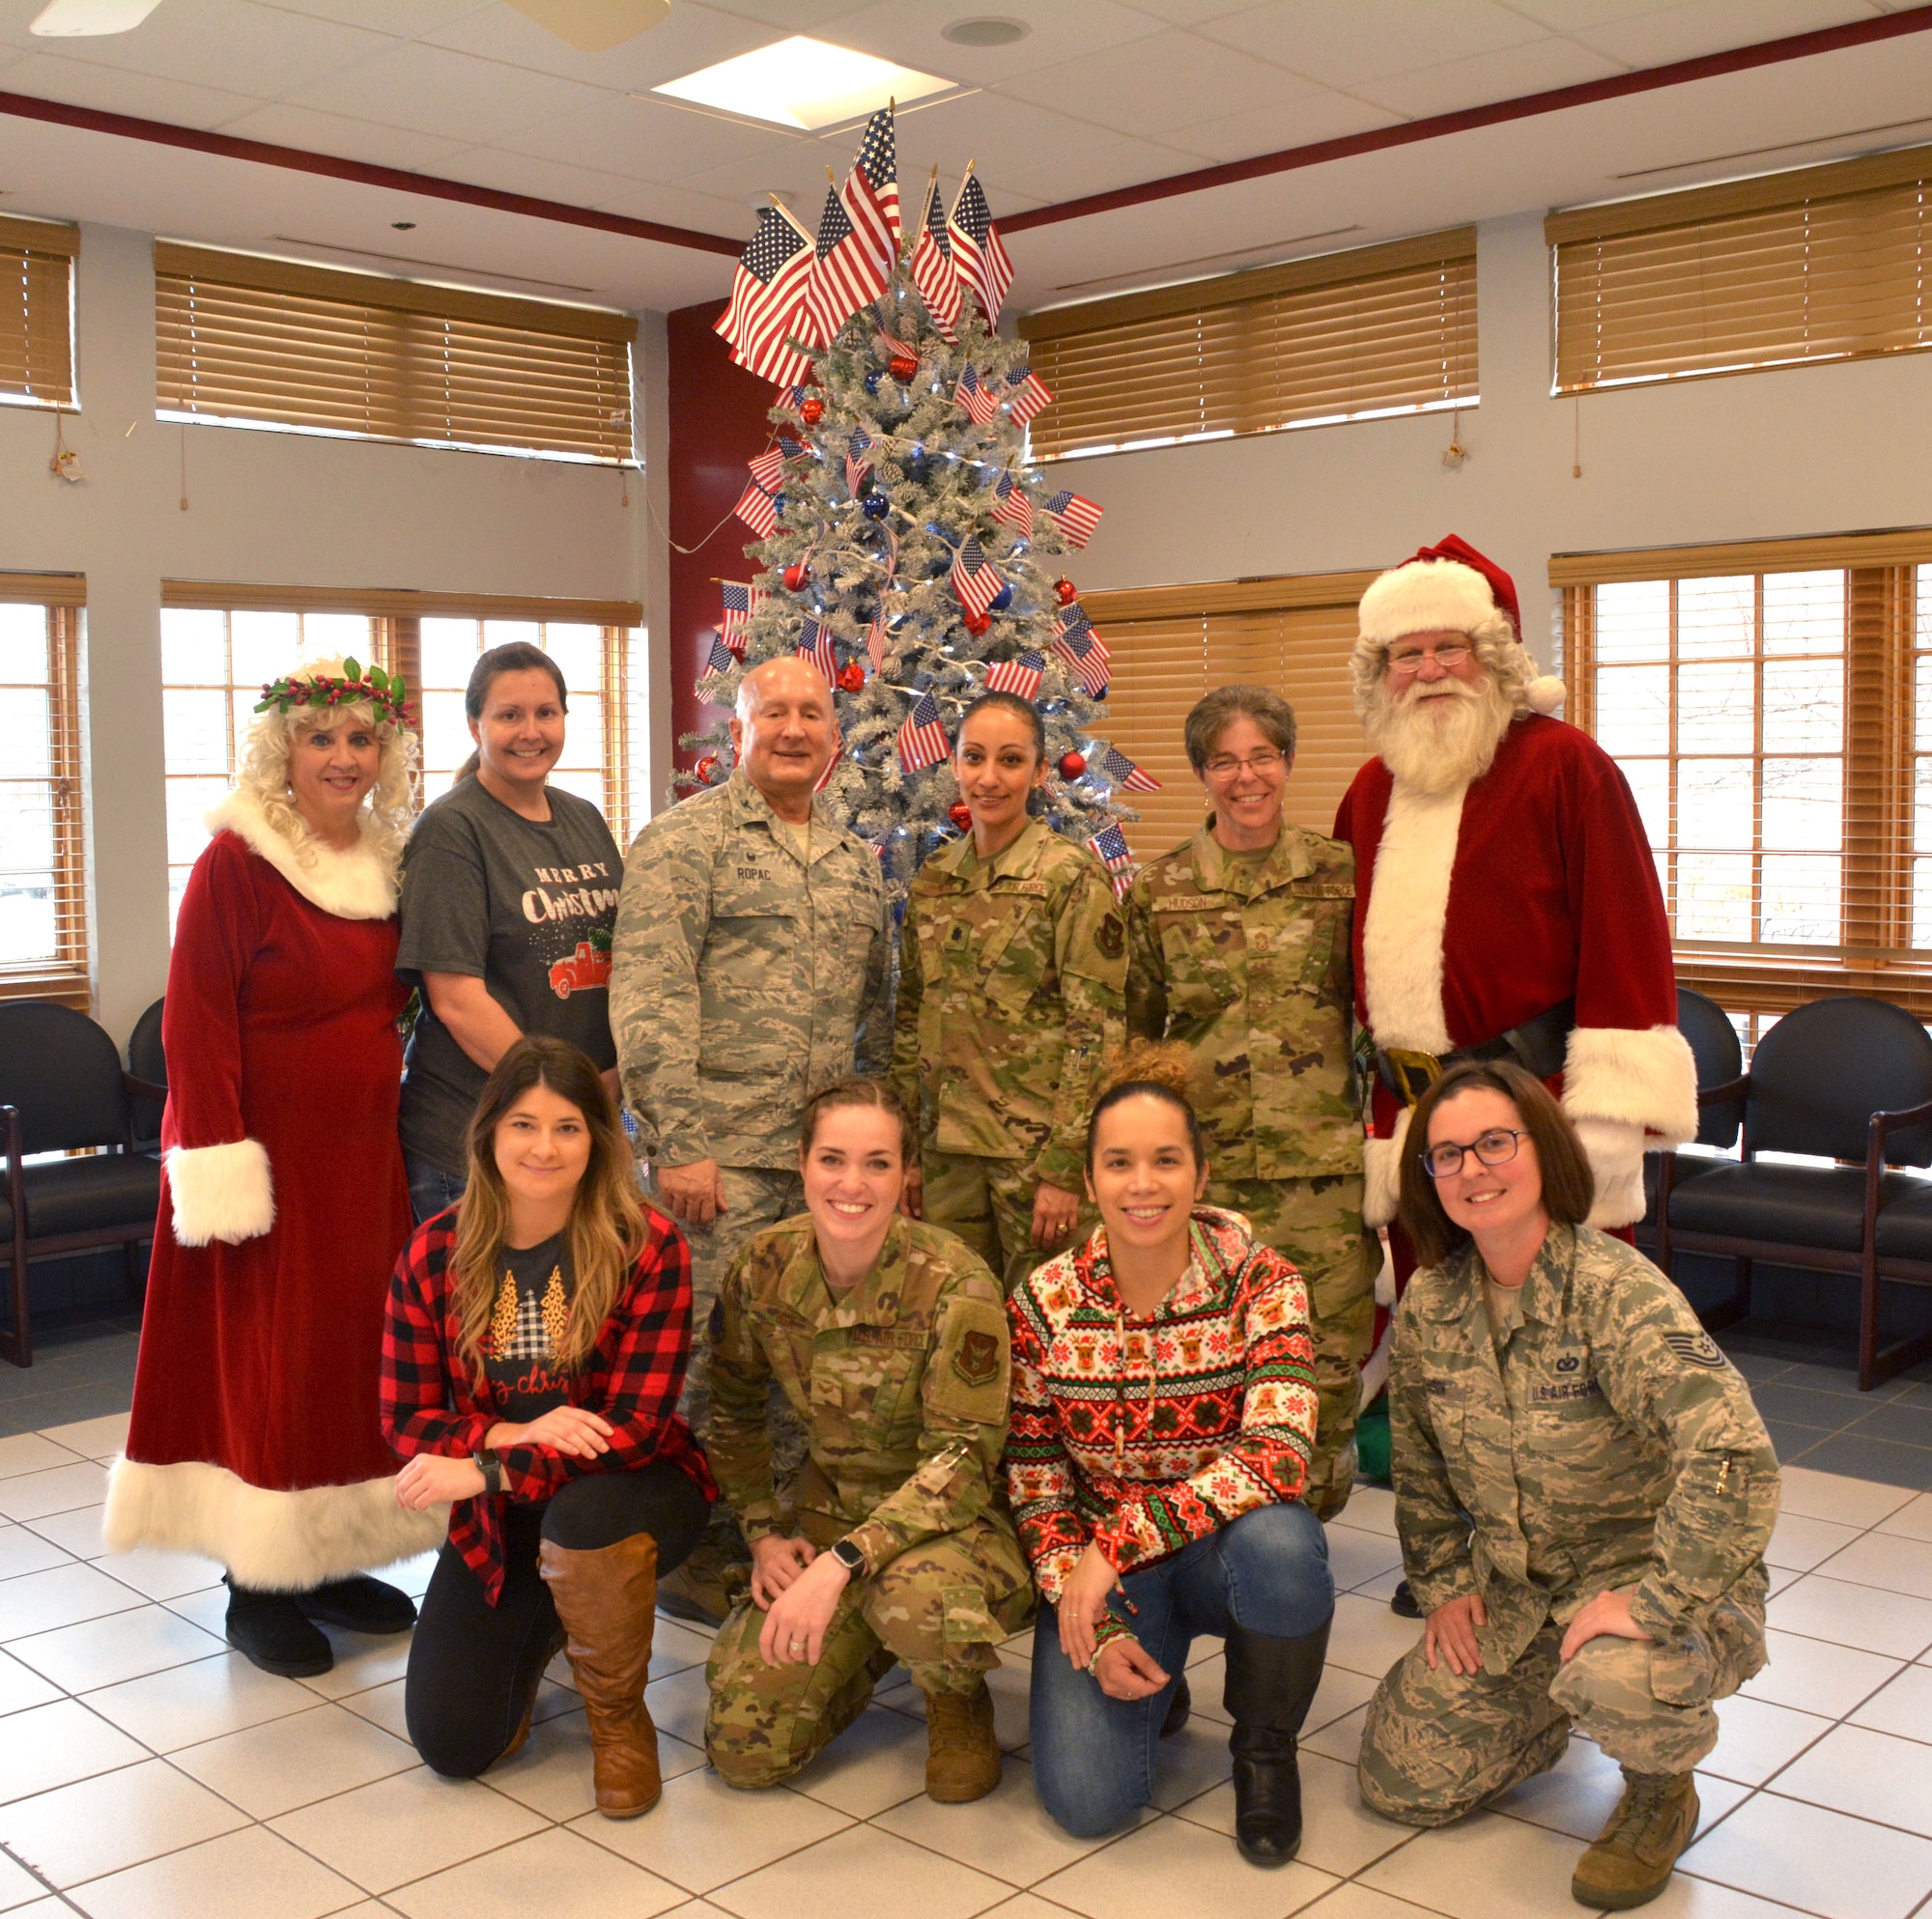 Members of the 507th Air Refueling Wing visited with veterans at the Norman Veteran's Center in Norman, Oklahoma, Dec. 20, 2019. (U.S. Air Force photo by Tech. Sgt. Samantha Mathison)